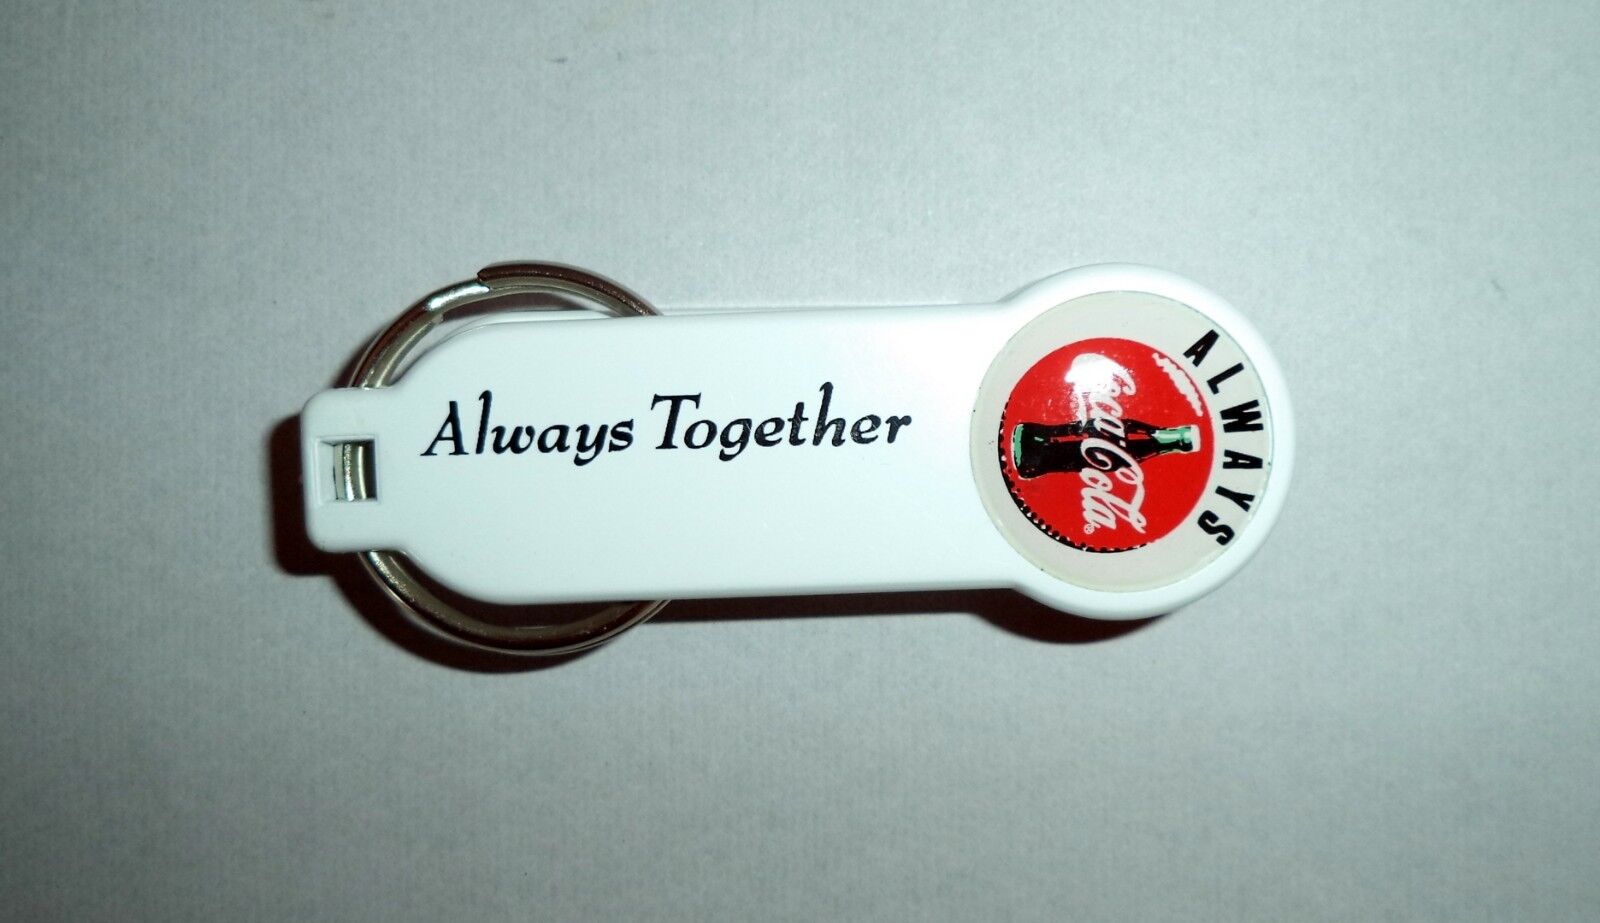 Always Together Coca Cola Keychains With Pen.